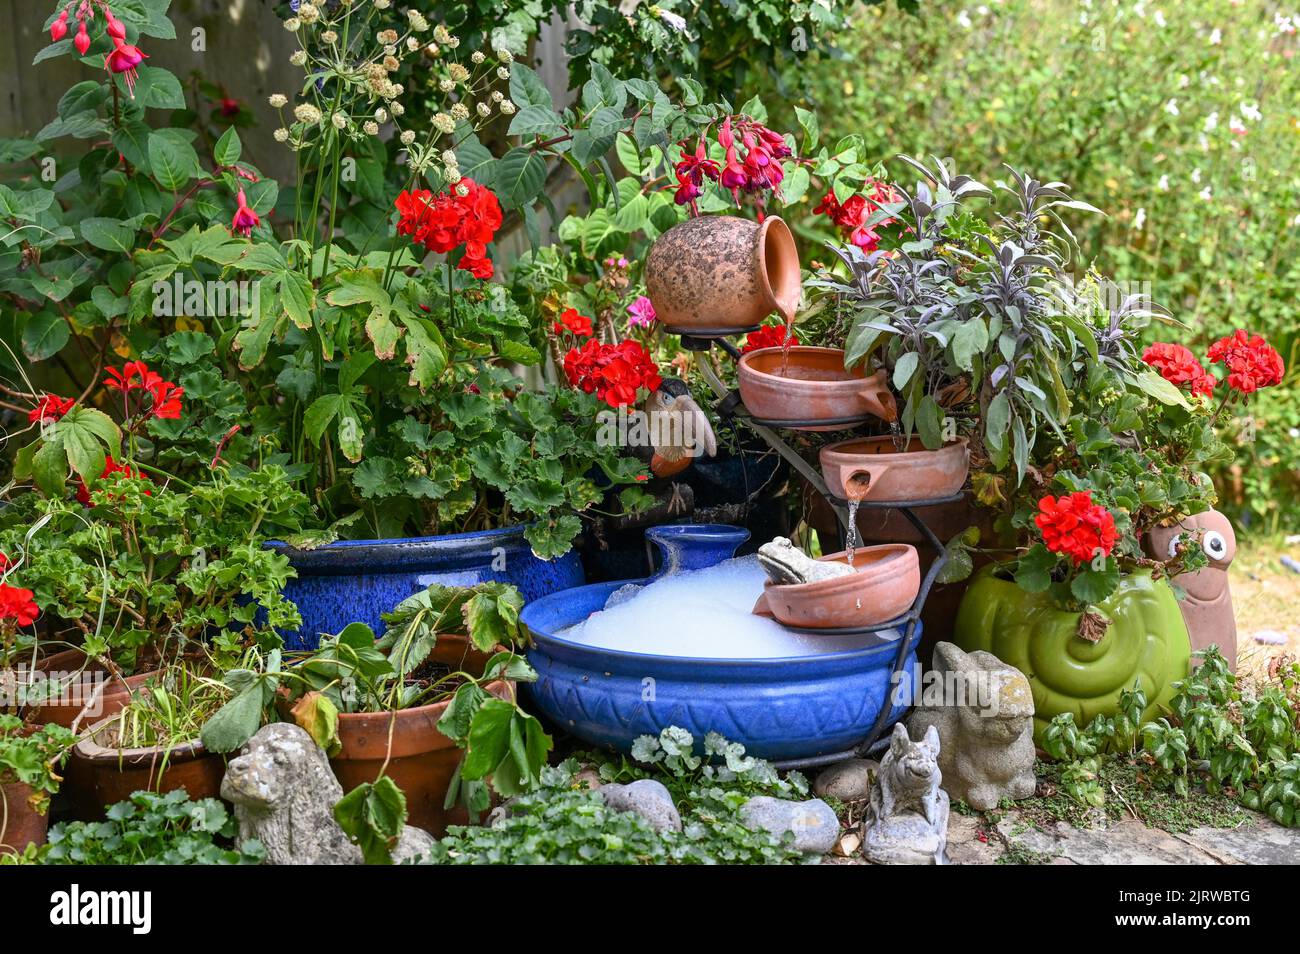 Garden water feature powered by a solar panel being cleaned out using detergent making bubbles in the water Stock Photo